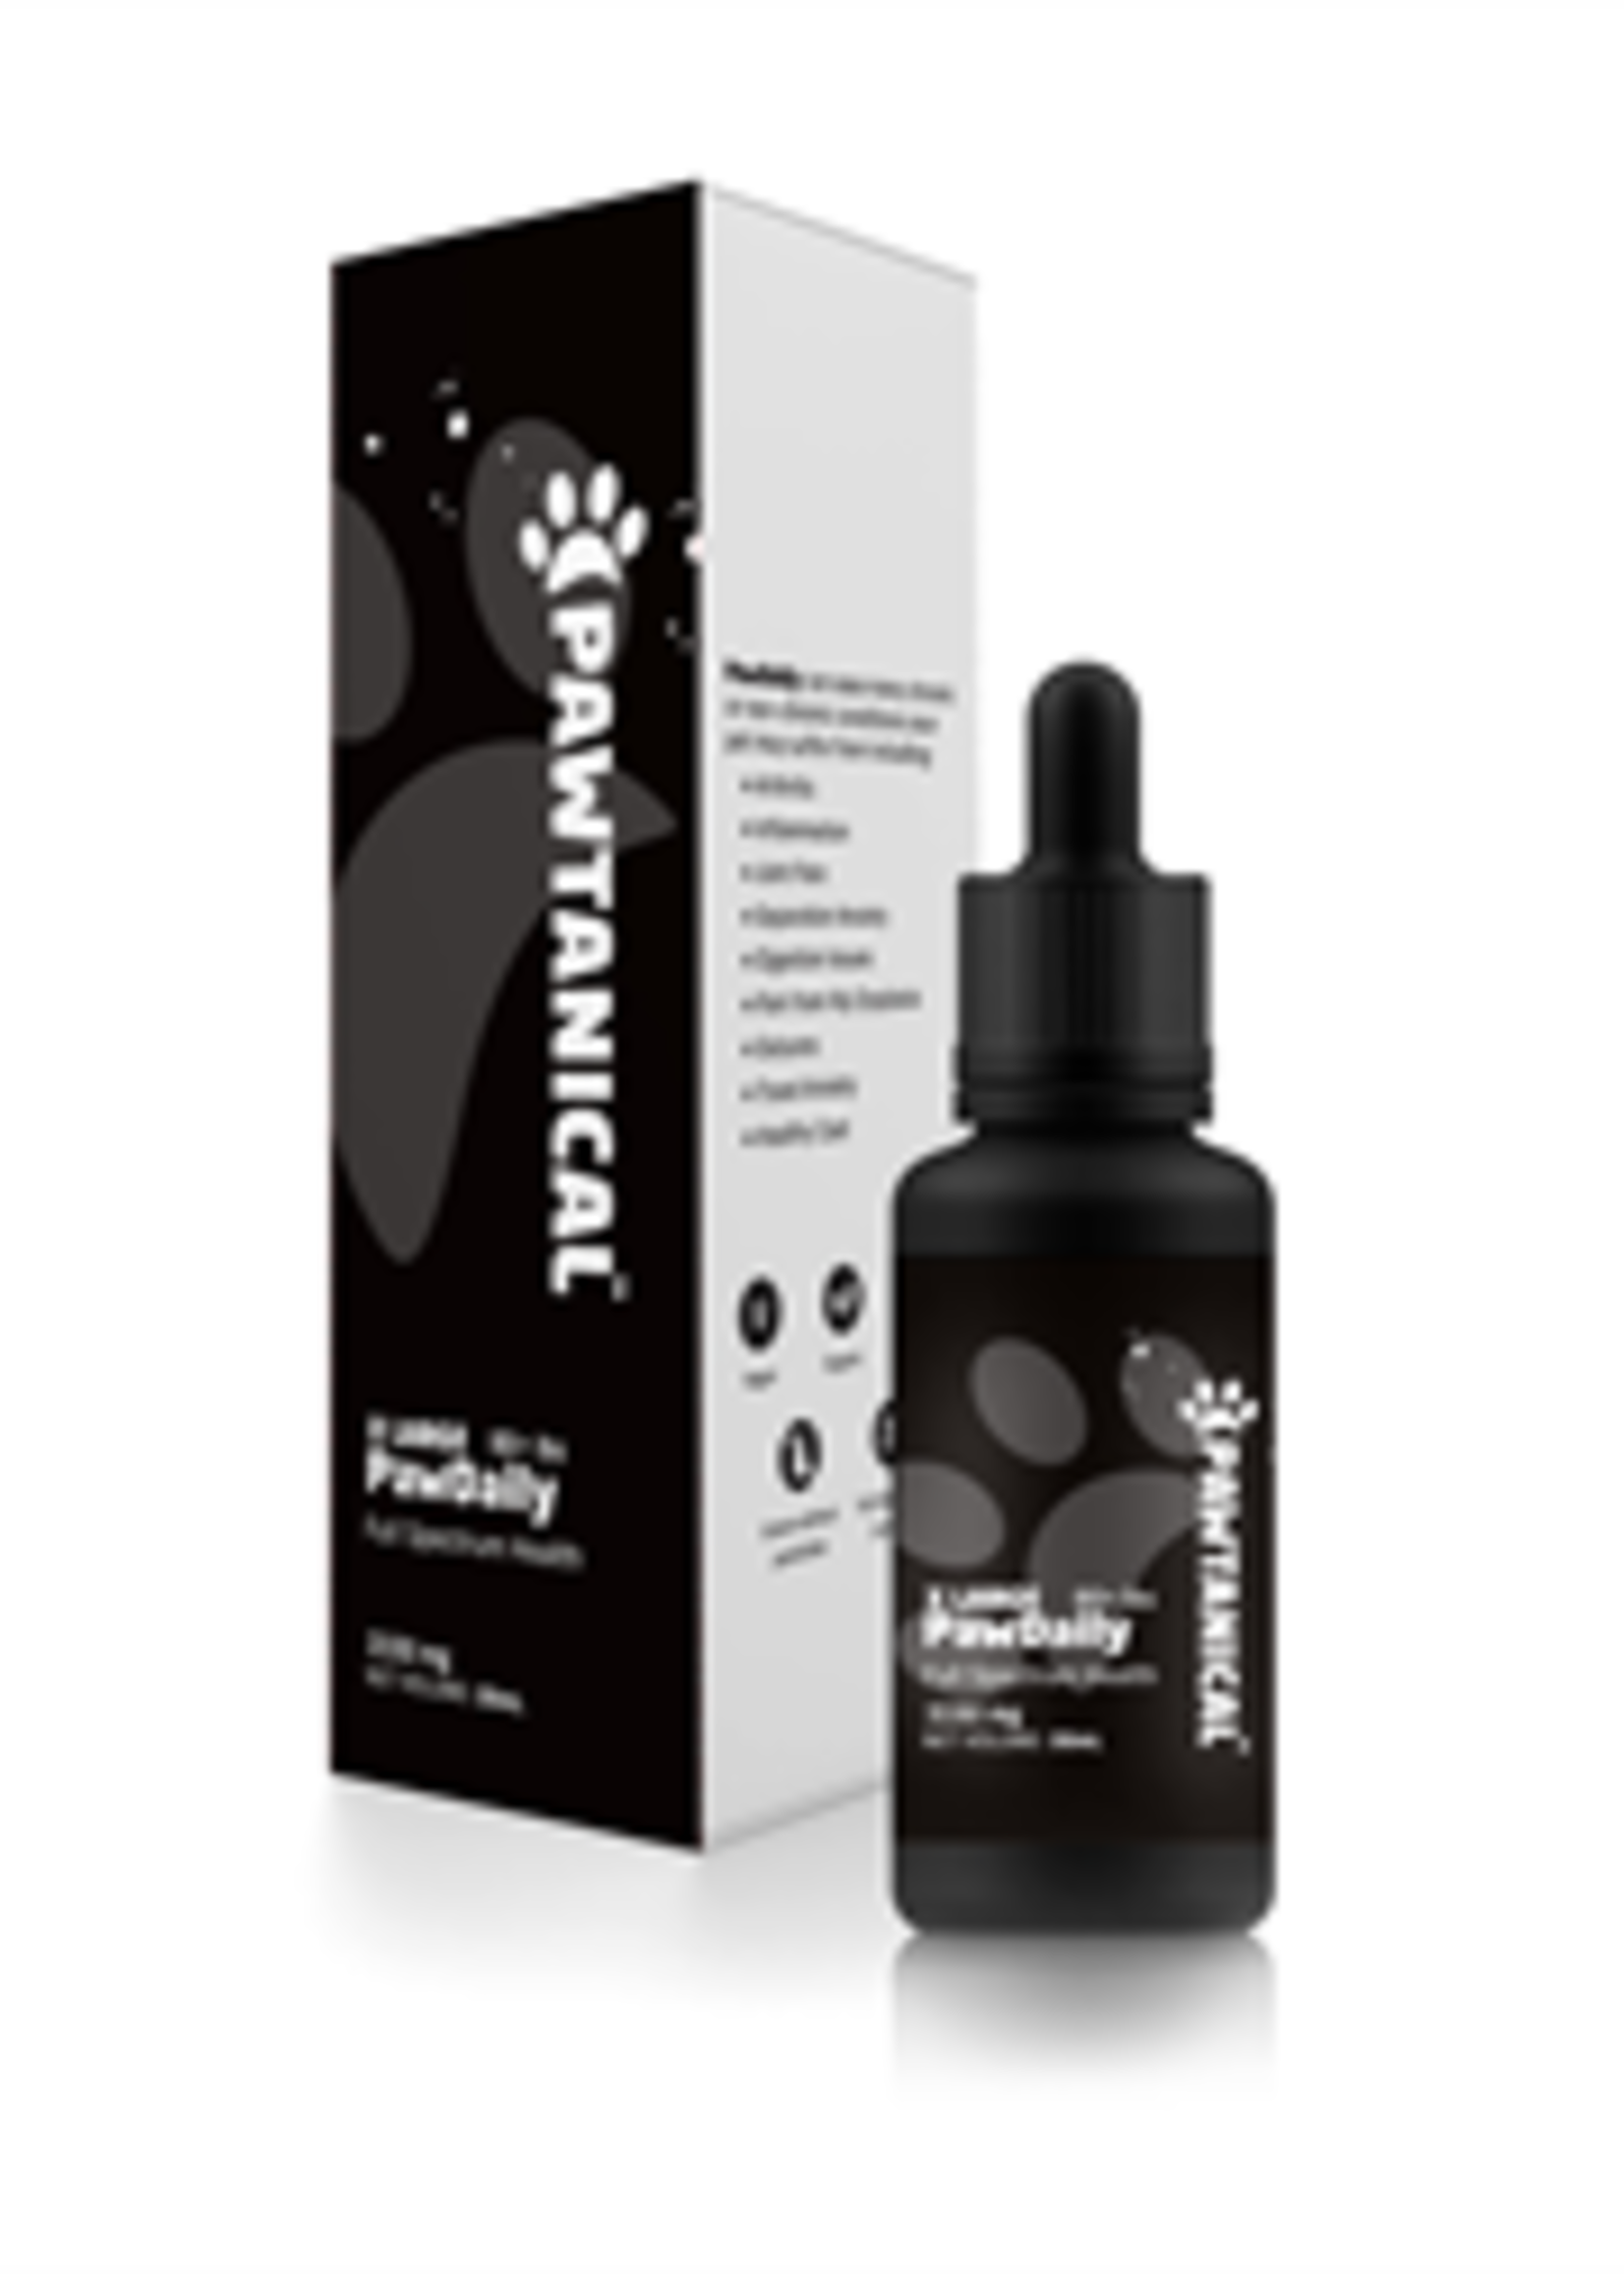 Pawtanicals Pawtanical PawDaily Full Spectrum Hemp Health Oil 650mg - Small